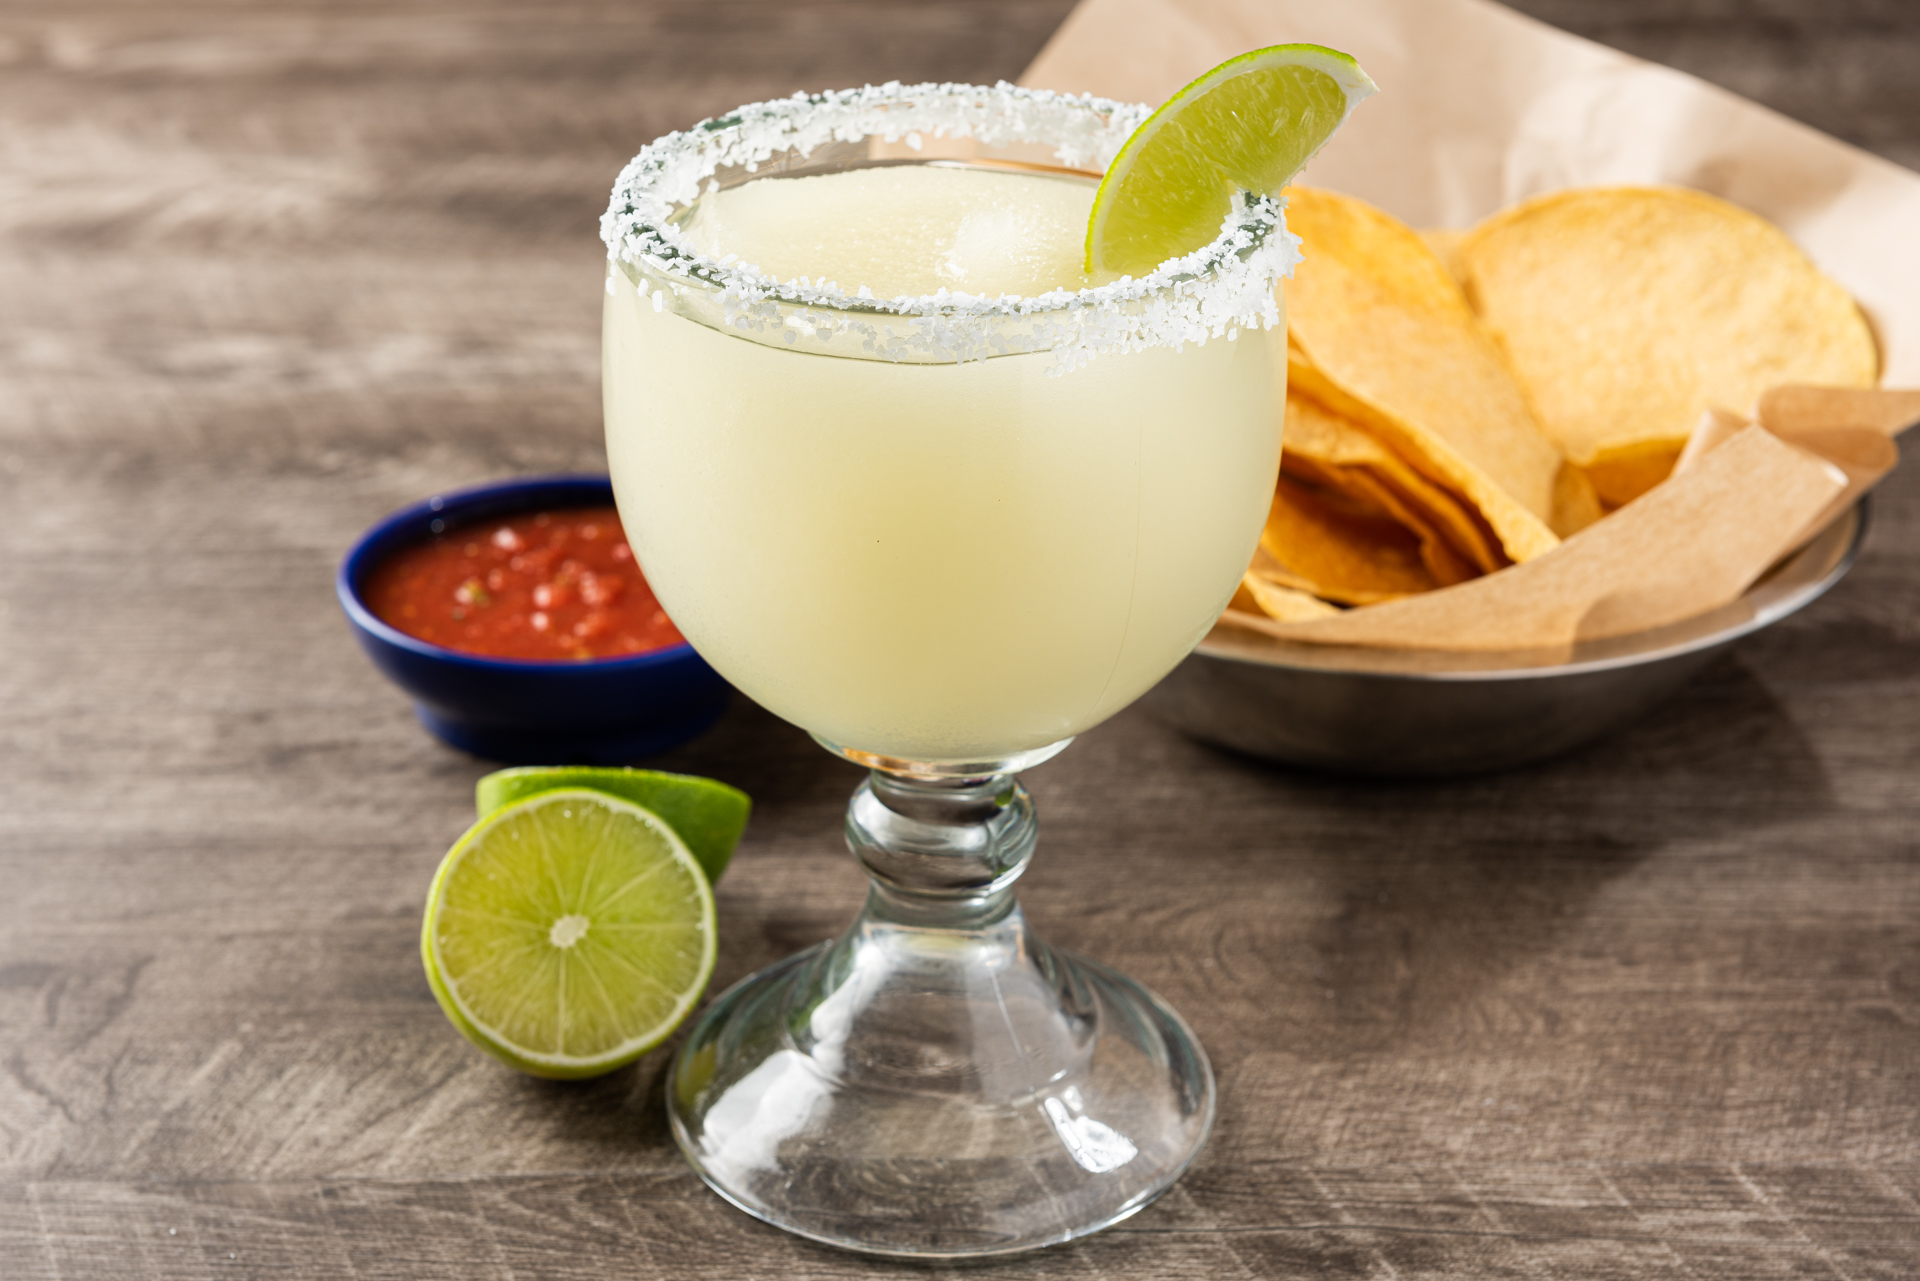 On The Border Mexican Grill & Cantina is celebrating National Margarita Day on Thursday, February 22 by offering its famous Grande House Margarita for only $4.